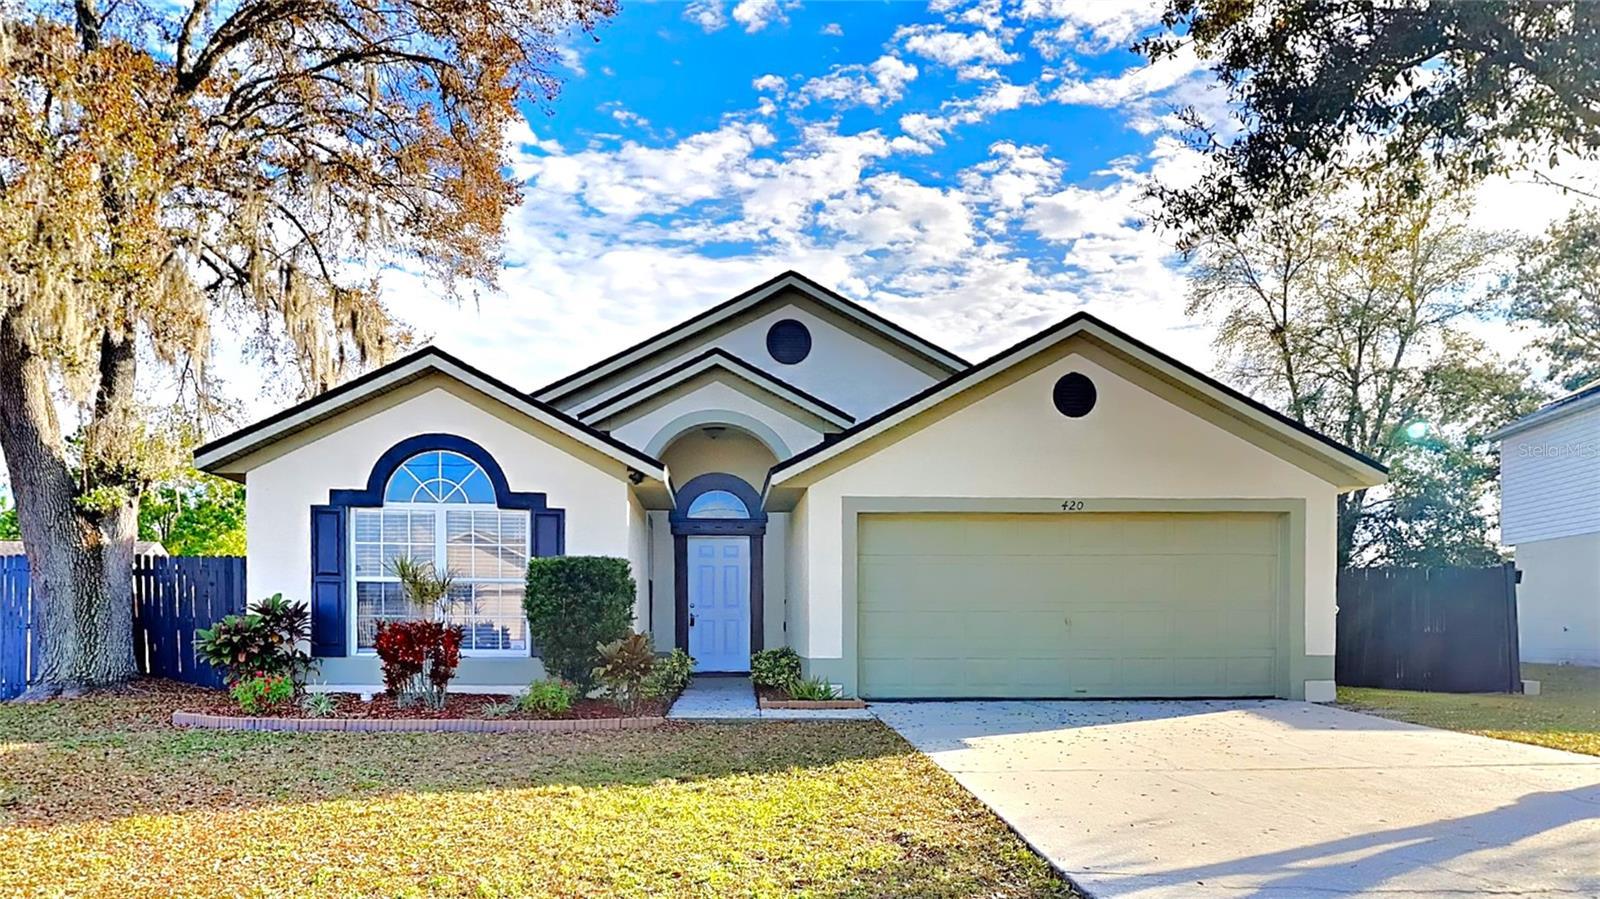 Photo one of 420 Cardinal Ct Kissimmee FL 34759 | MLS T3505278